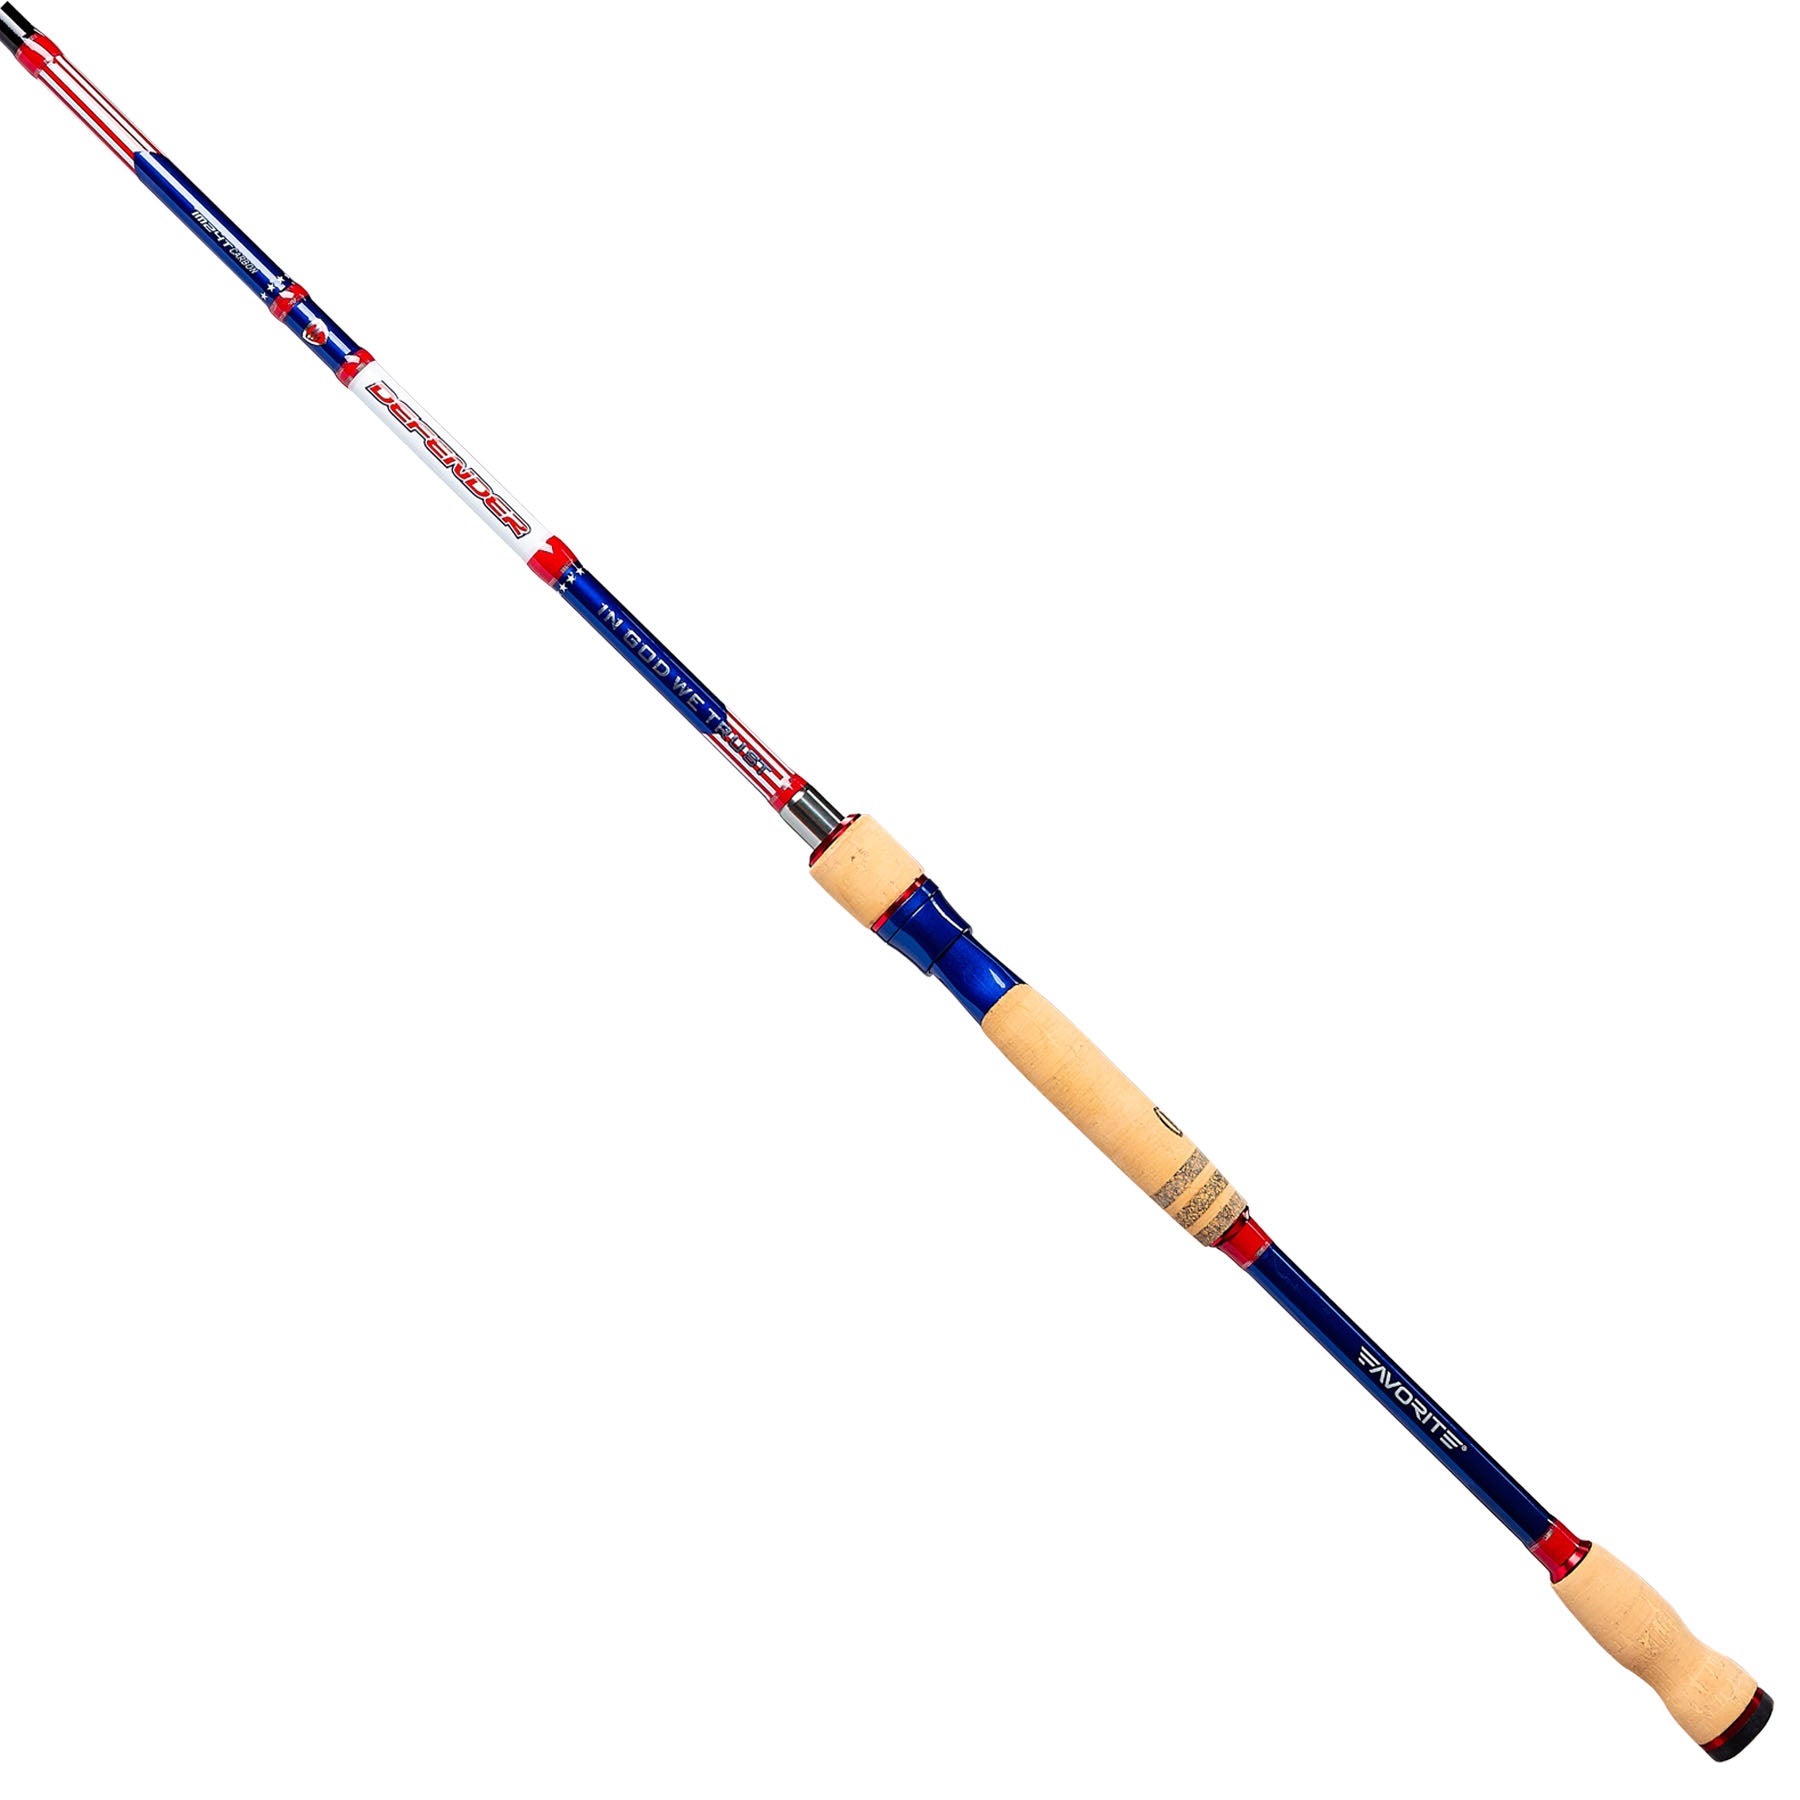 Favorite Fishing Lit 3000 Series 7 ft 3 in MH Spinning Rod and